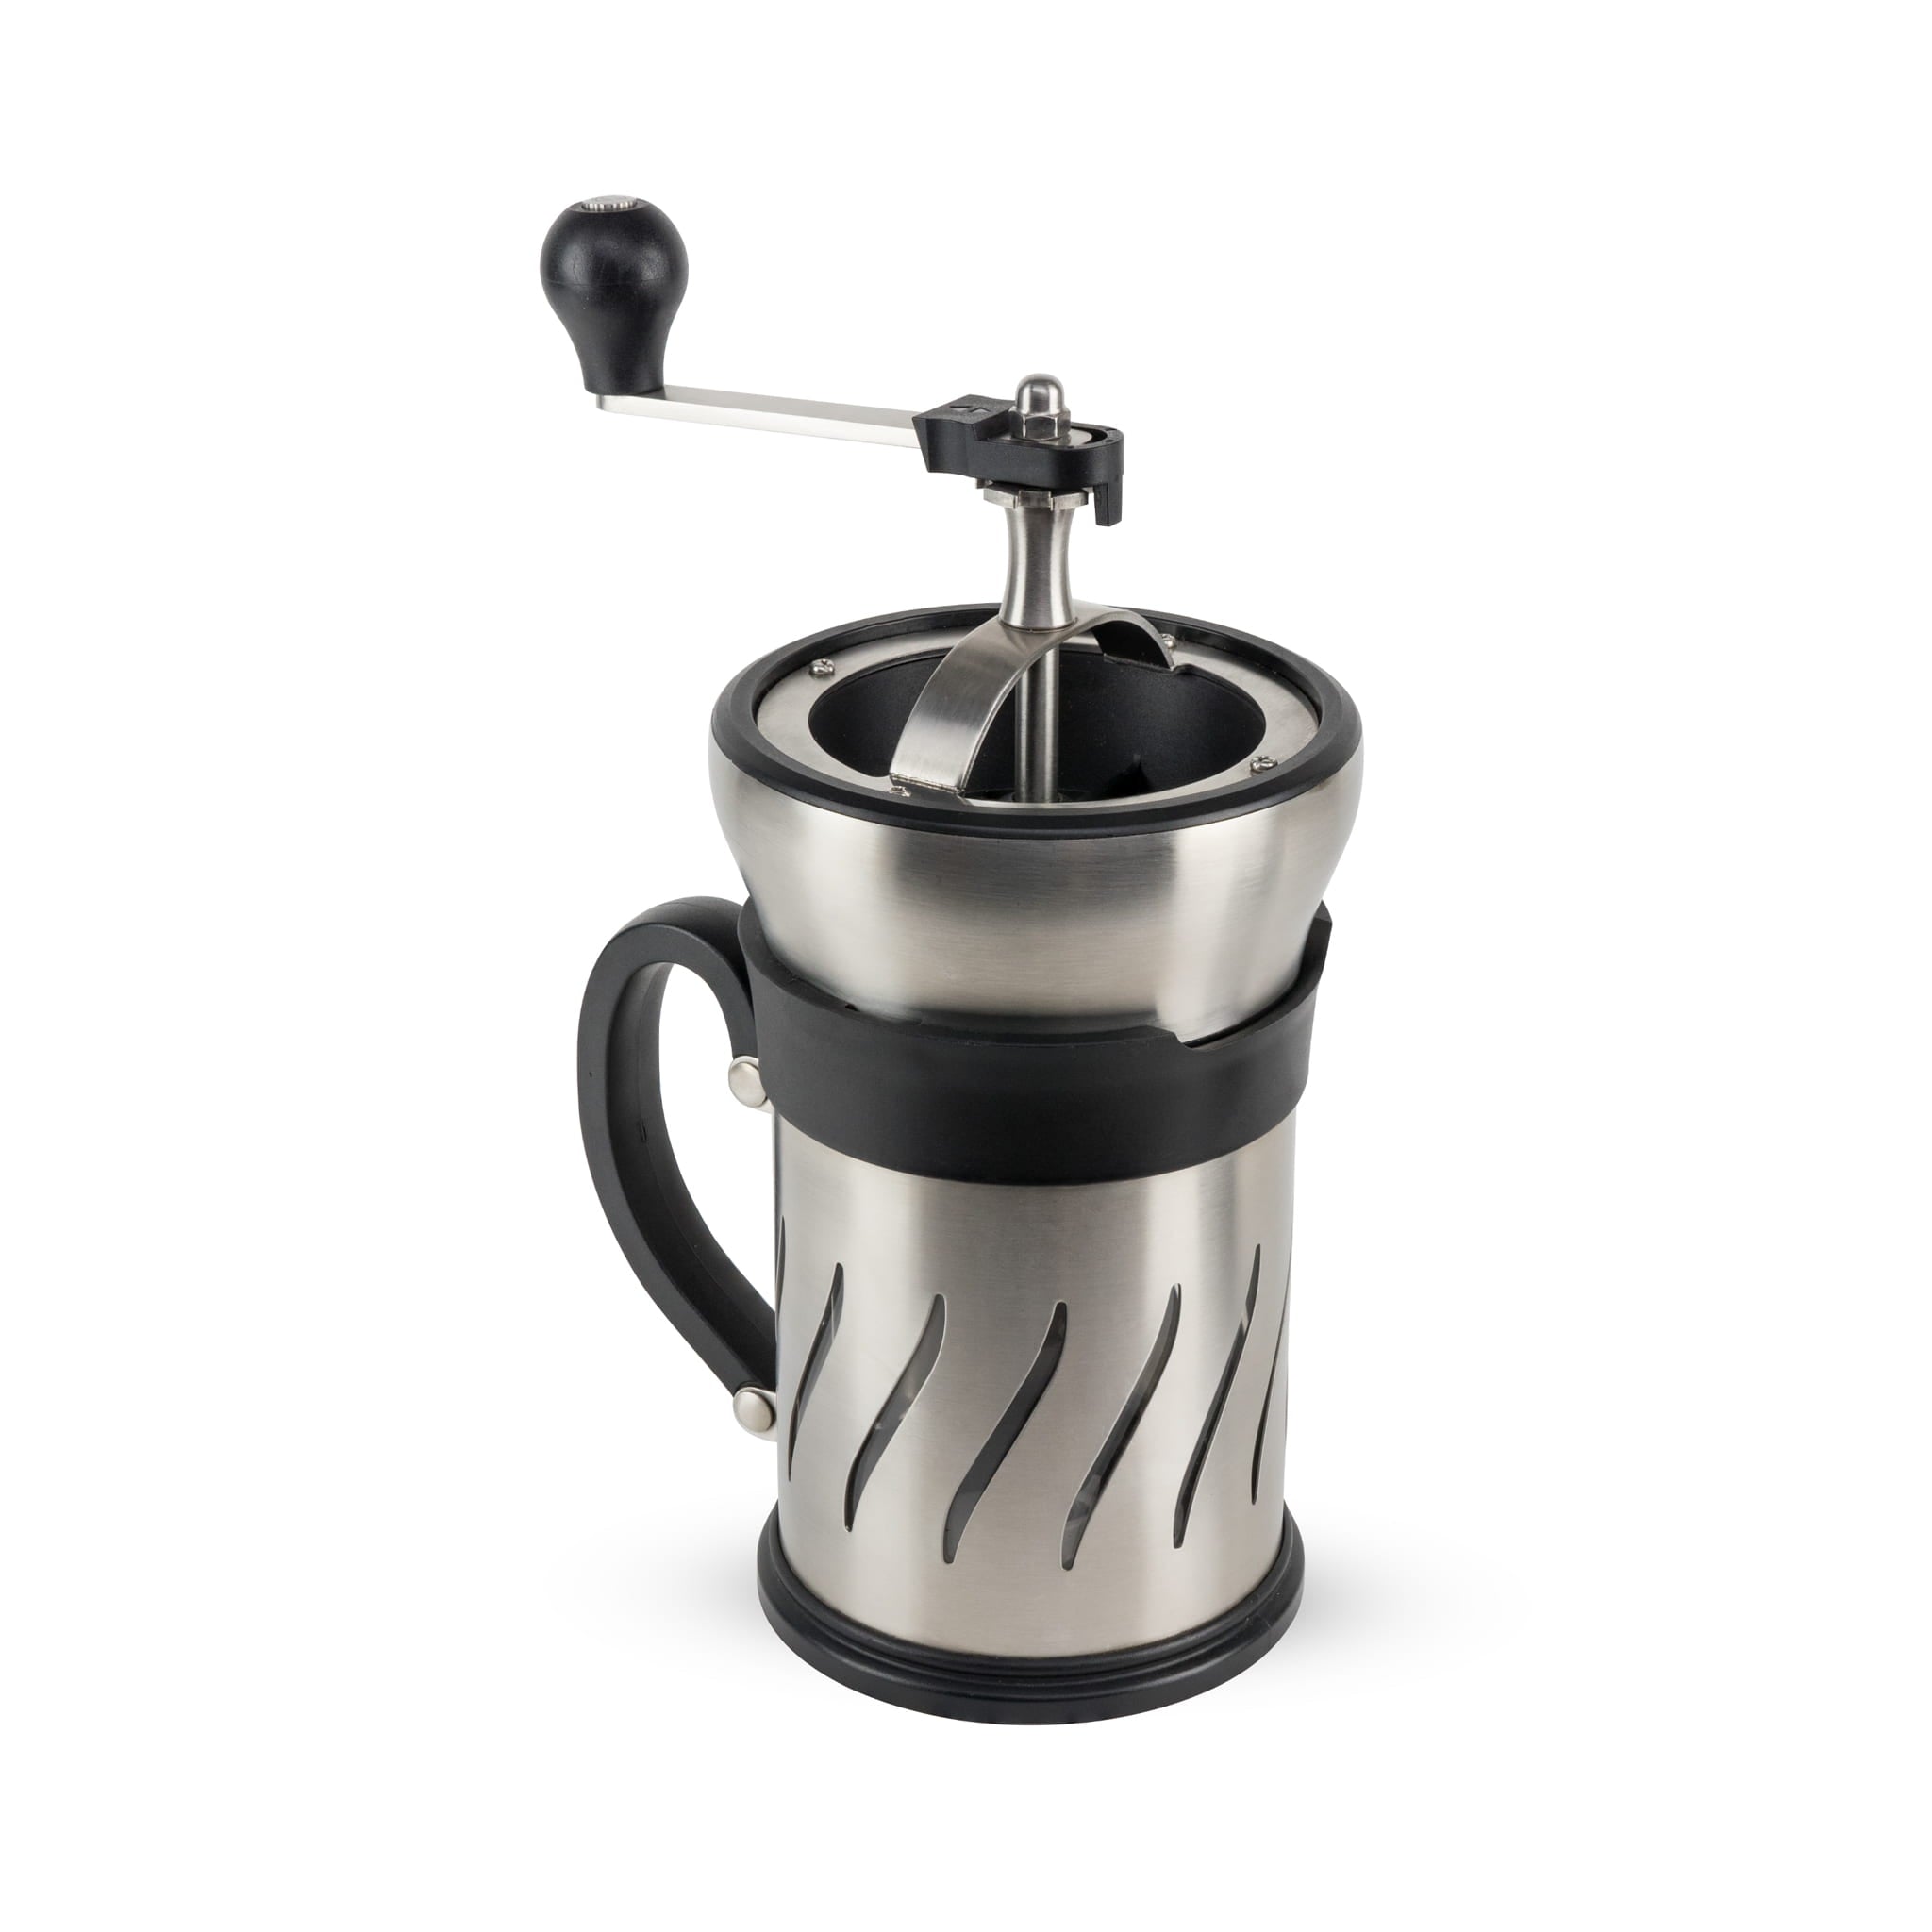 Peugeot Paris Press Coffe Mill and French Press 15cm